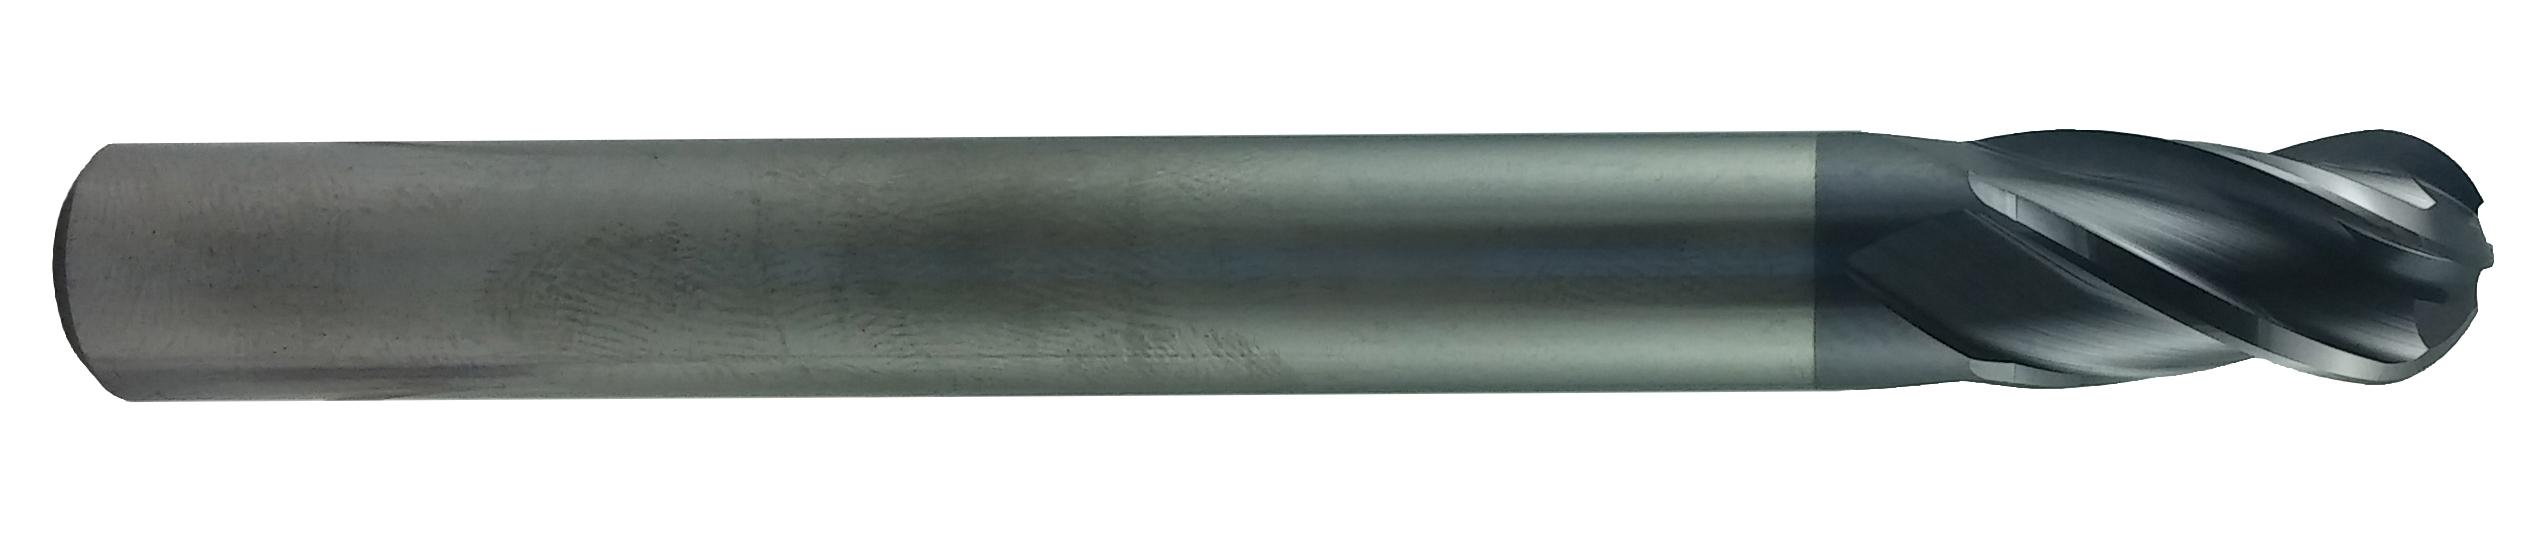 Fullerton Tool 32456 1/8 4 Flute Solid Carbide Uncoated Ball End Mill 